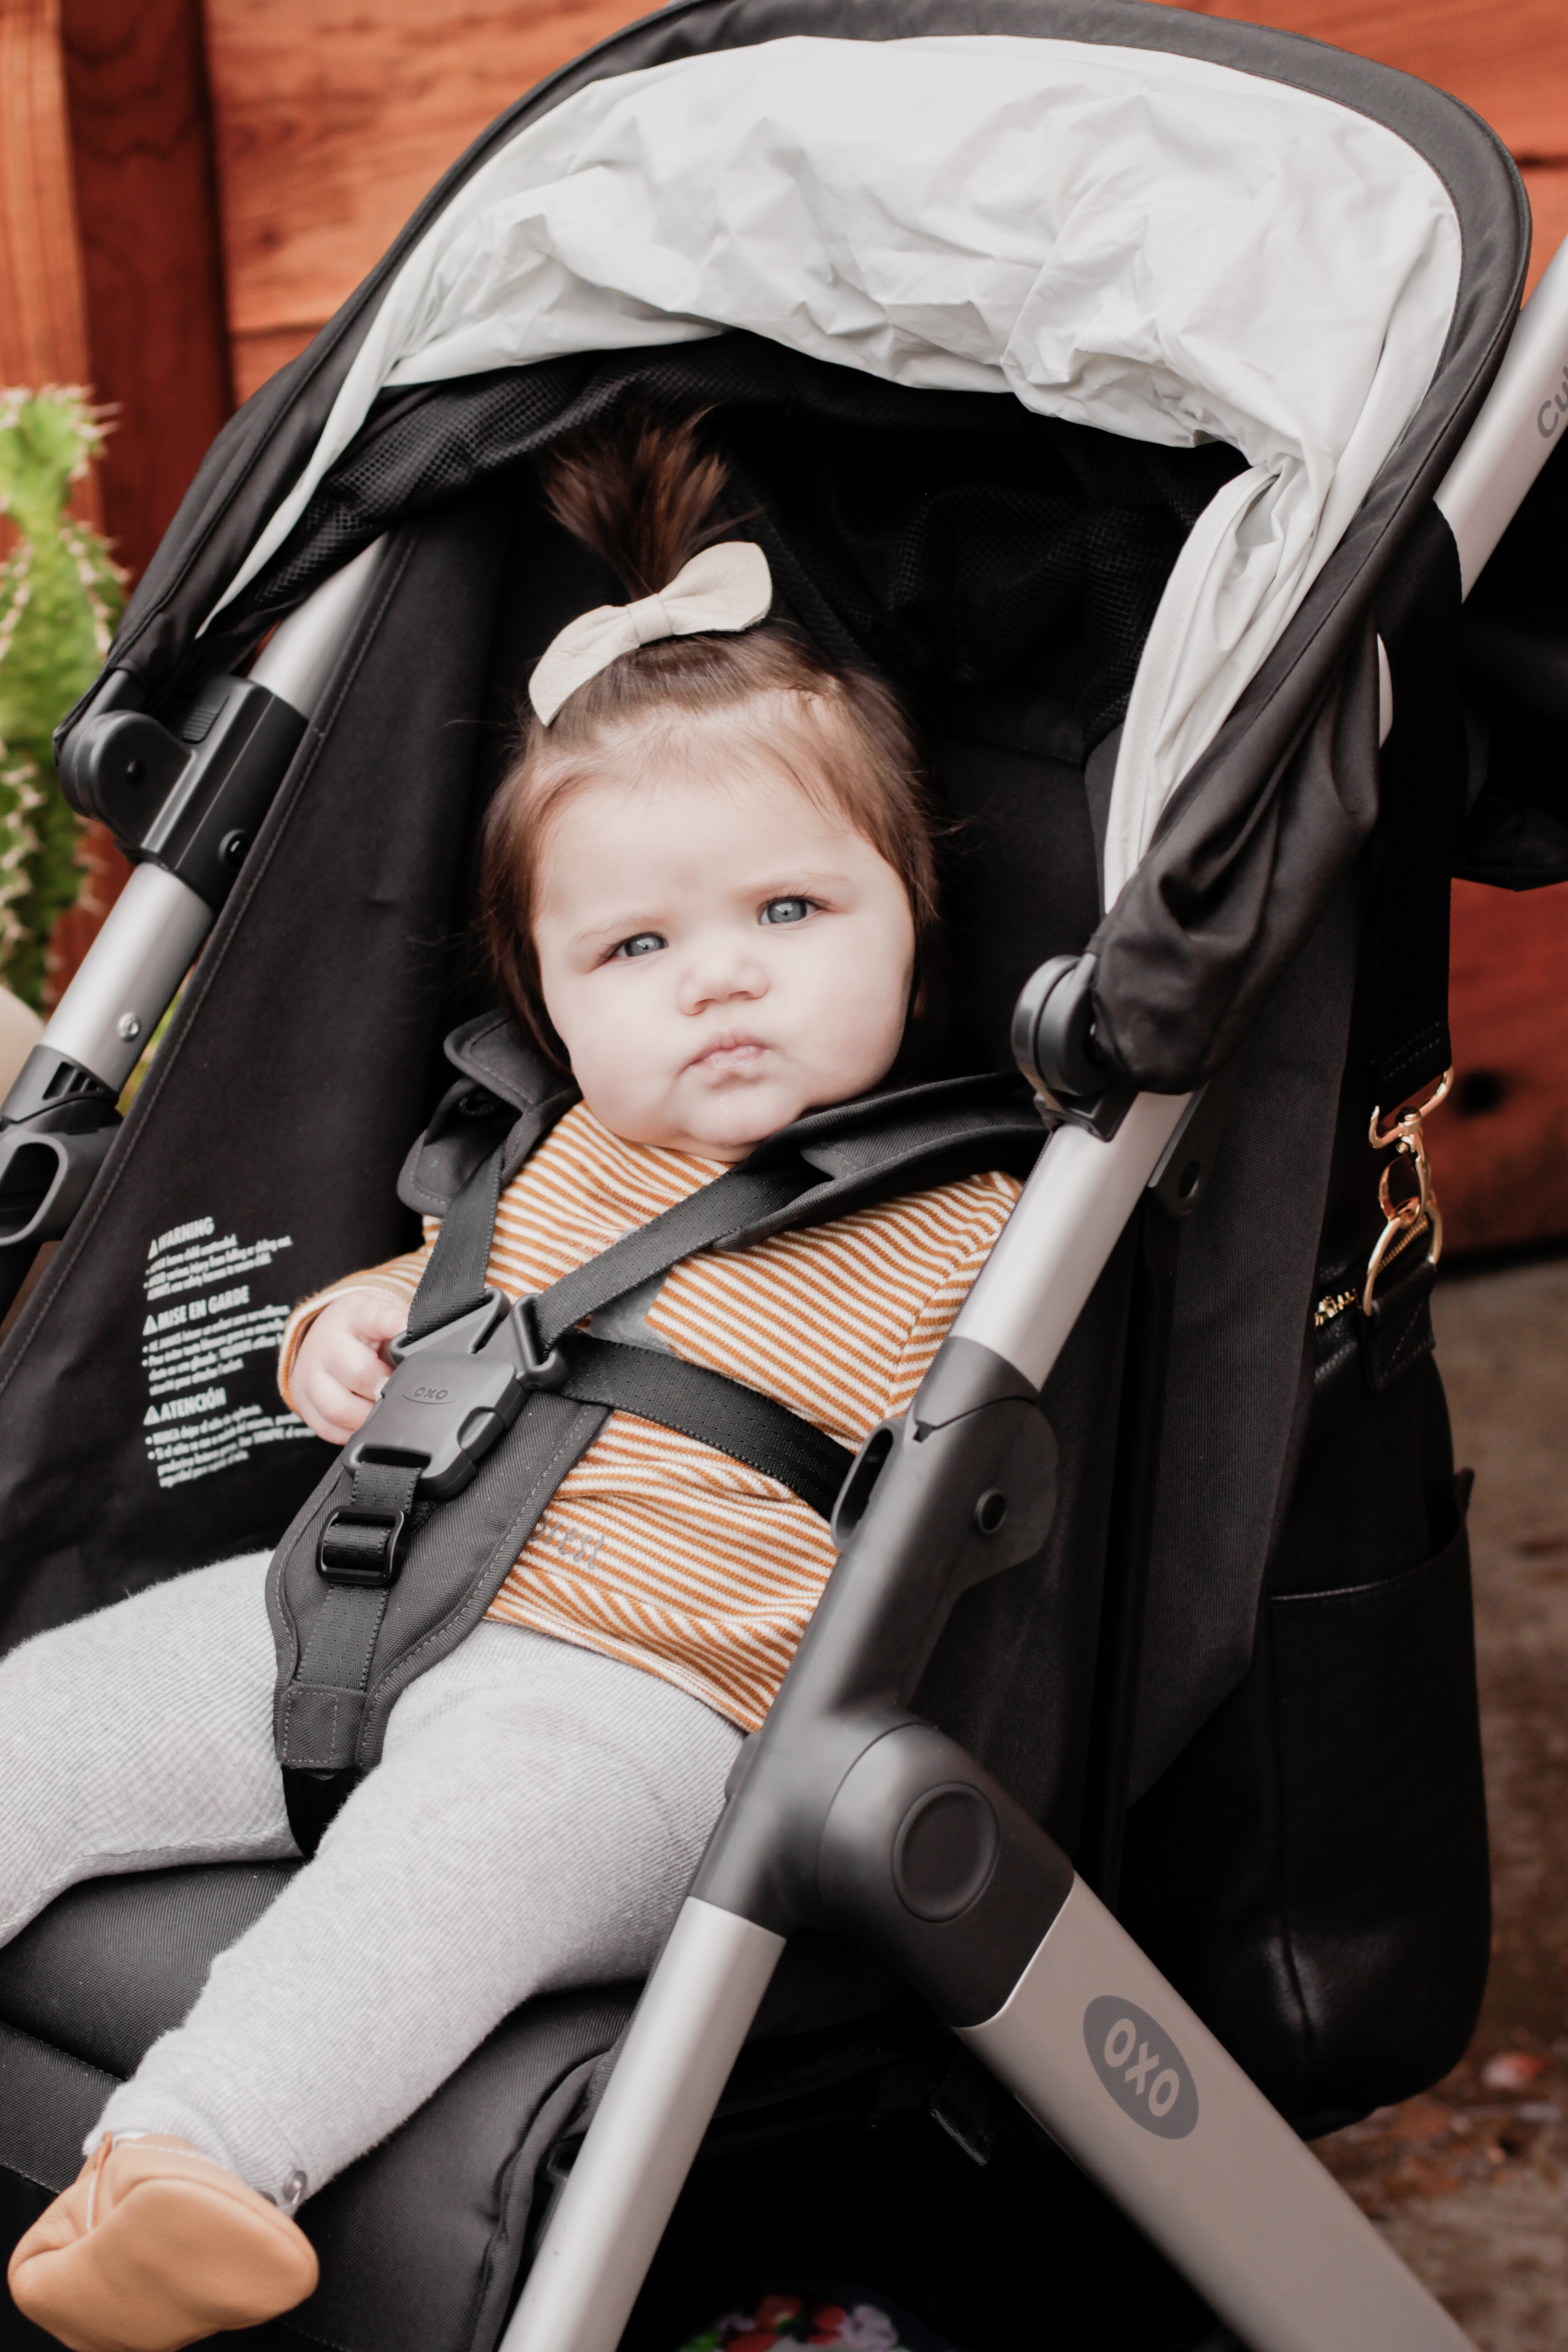 oxo cubby stroller review